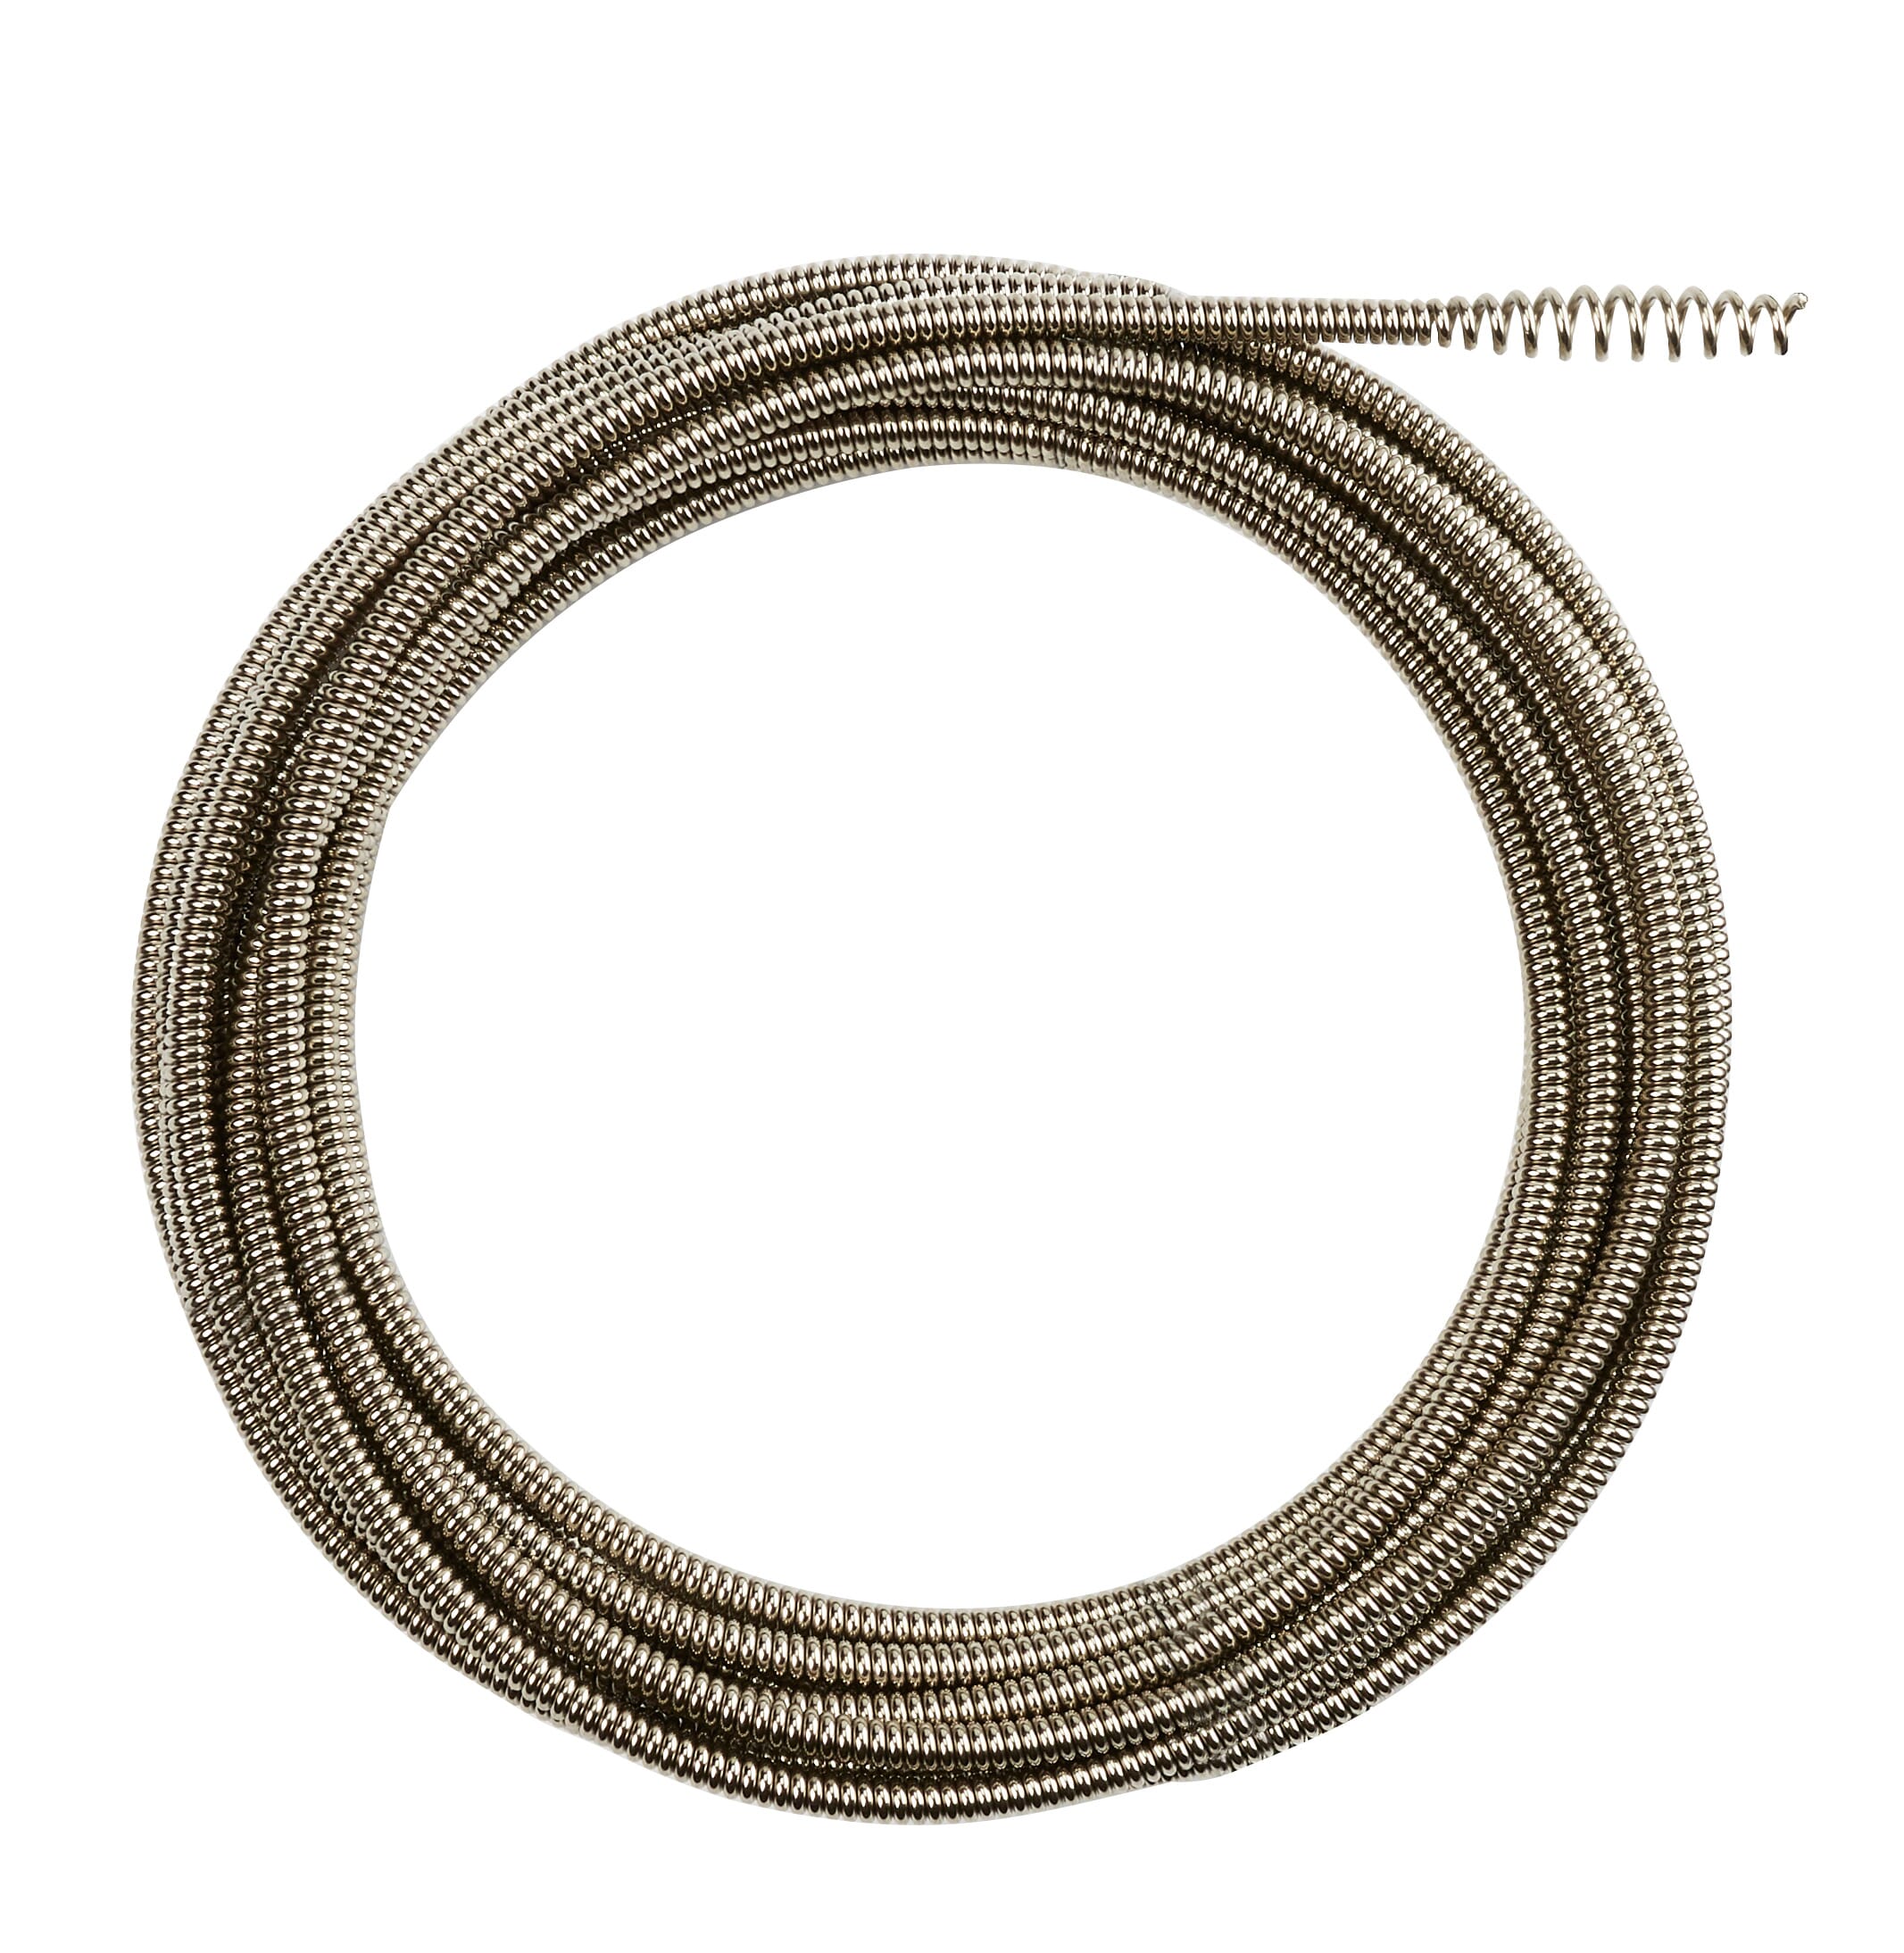 Milwaukee® 48-53-2561 Inner Core Bulb Head Drain Cleaning Cable, 5/16 in, Steel, For Use With Drain Cleaning Machines, 1-1/4 to 2-1/2 in Drain Line